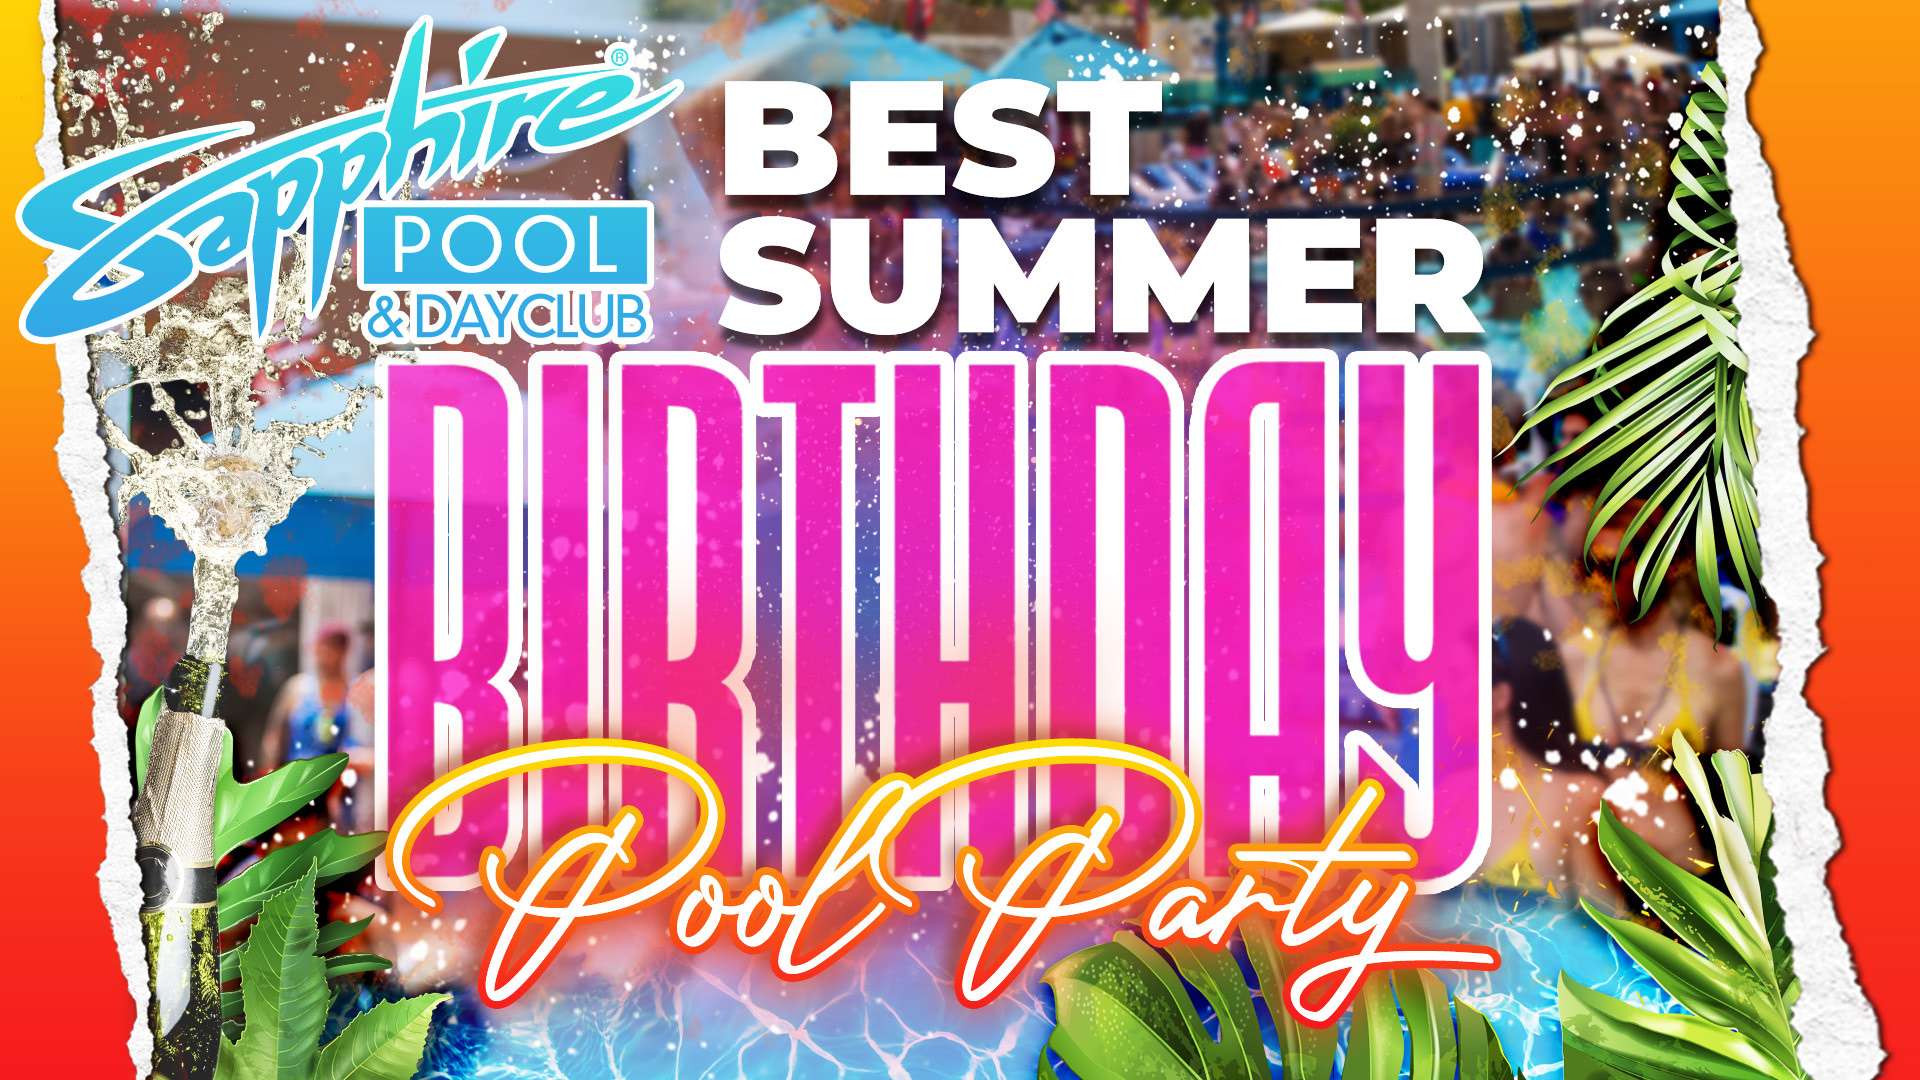 Sapphire Pool – Best Summer Birthday Pool Party – image of champagne bottle popping open next to a pool in a tropical setting